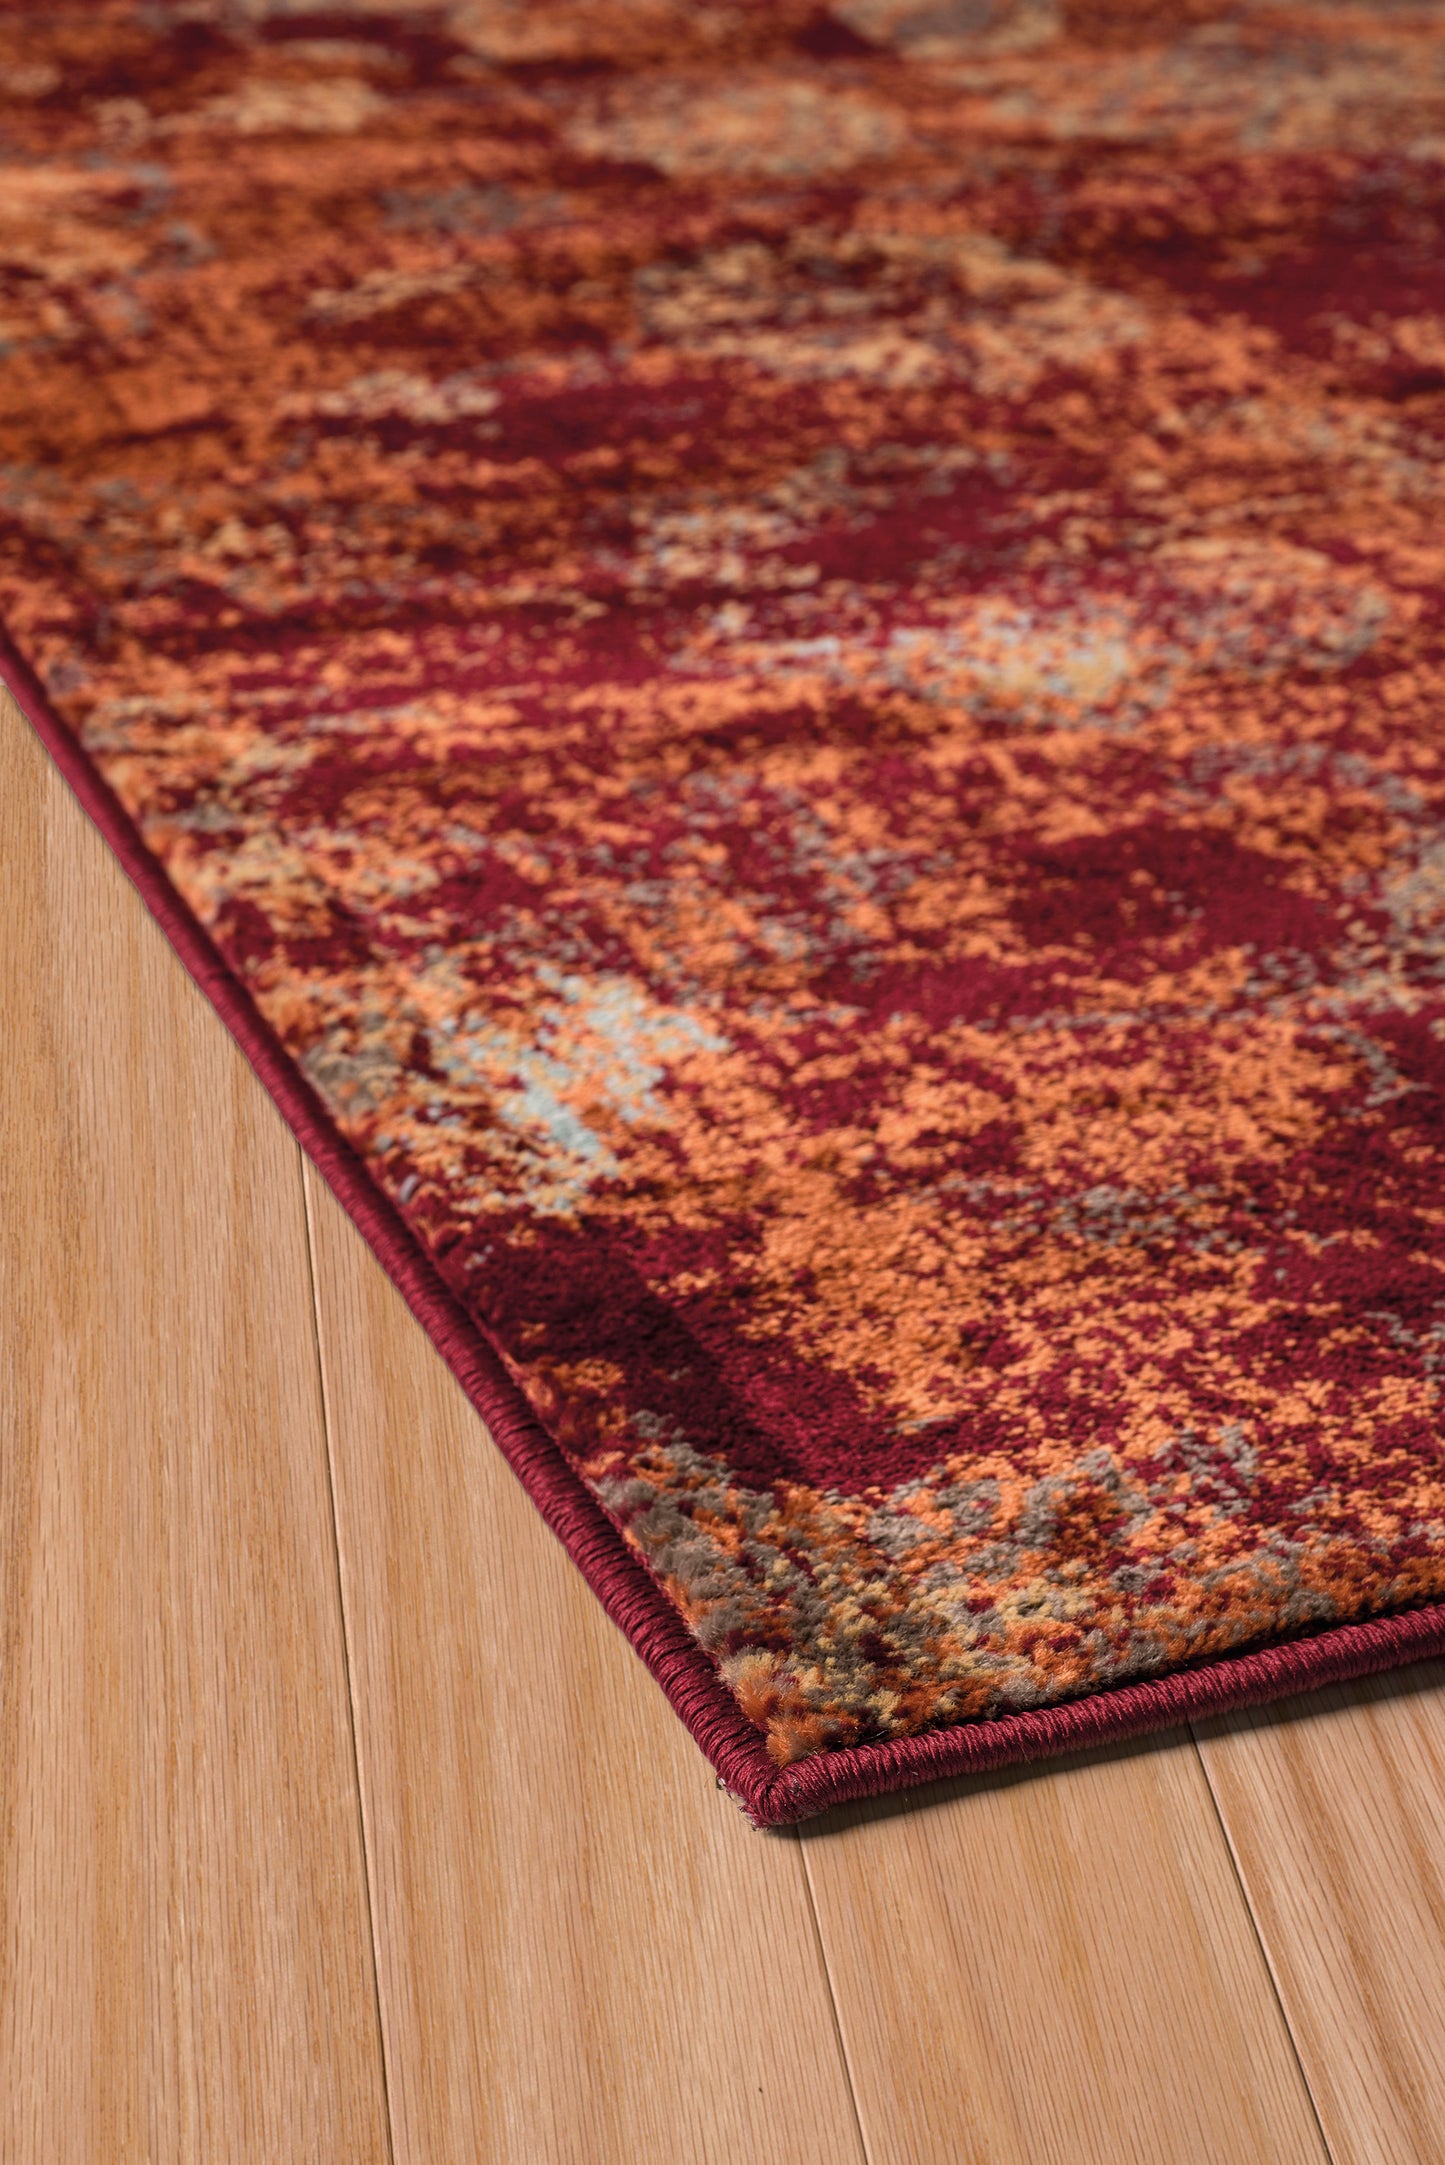 3001-Via_Vicosa Synthetic Blend Indoor Area Rug by United Weavers